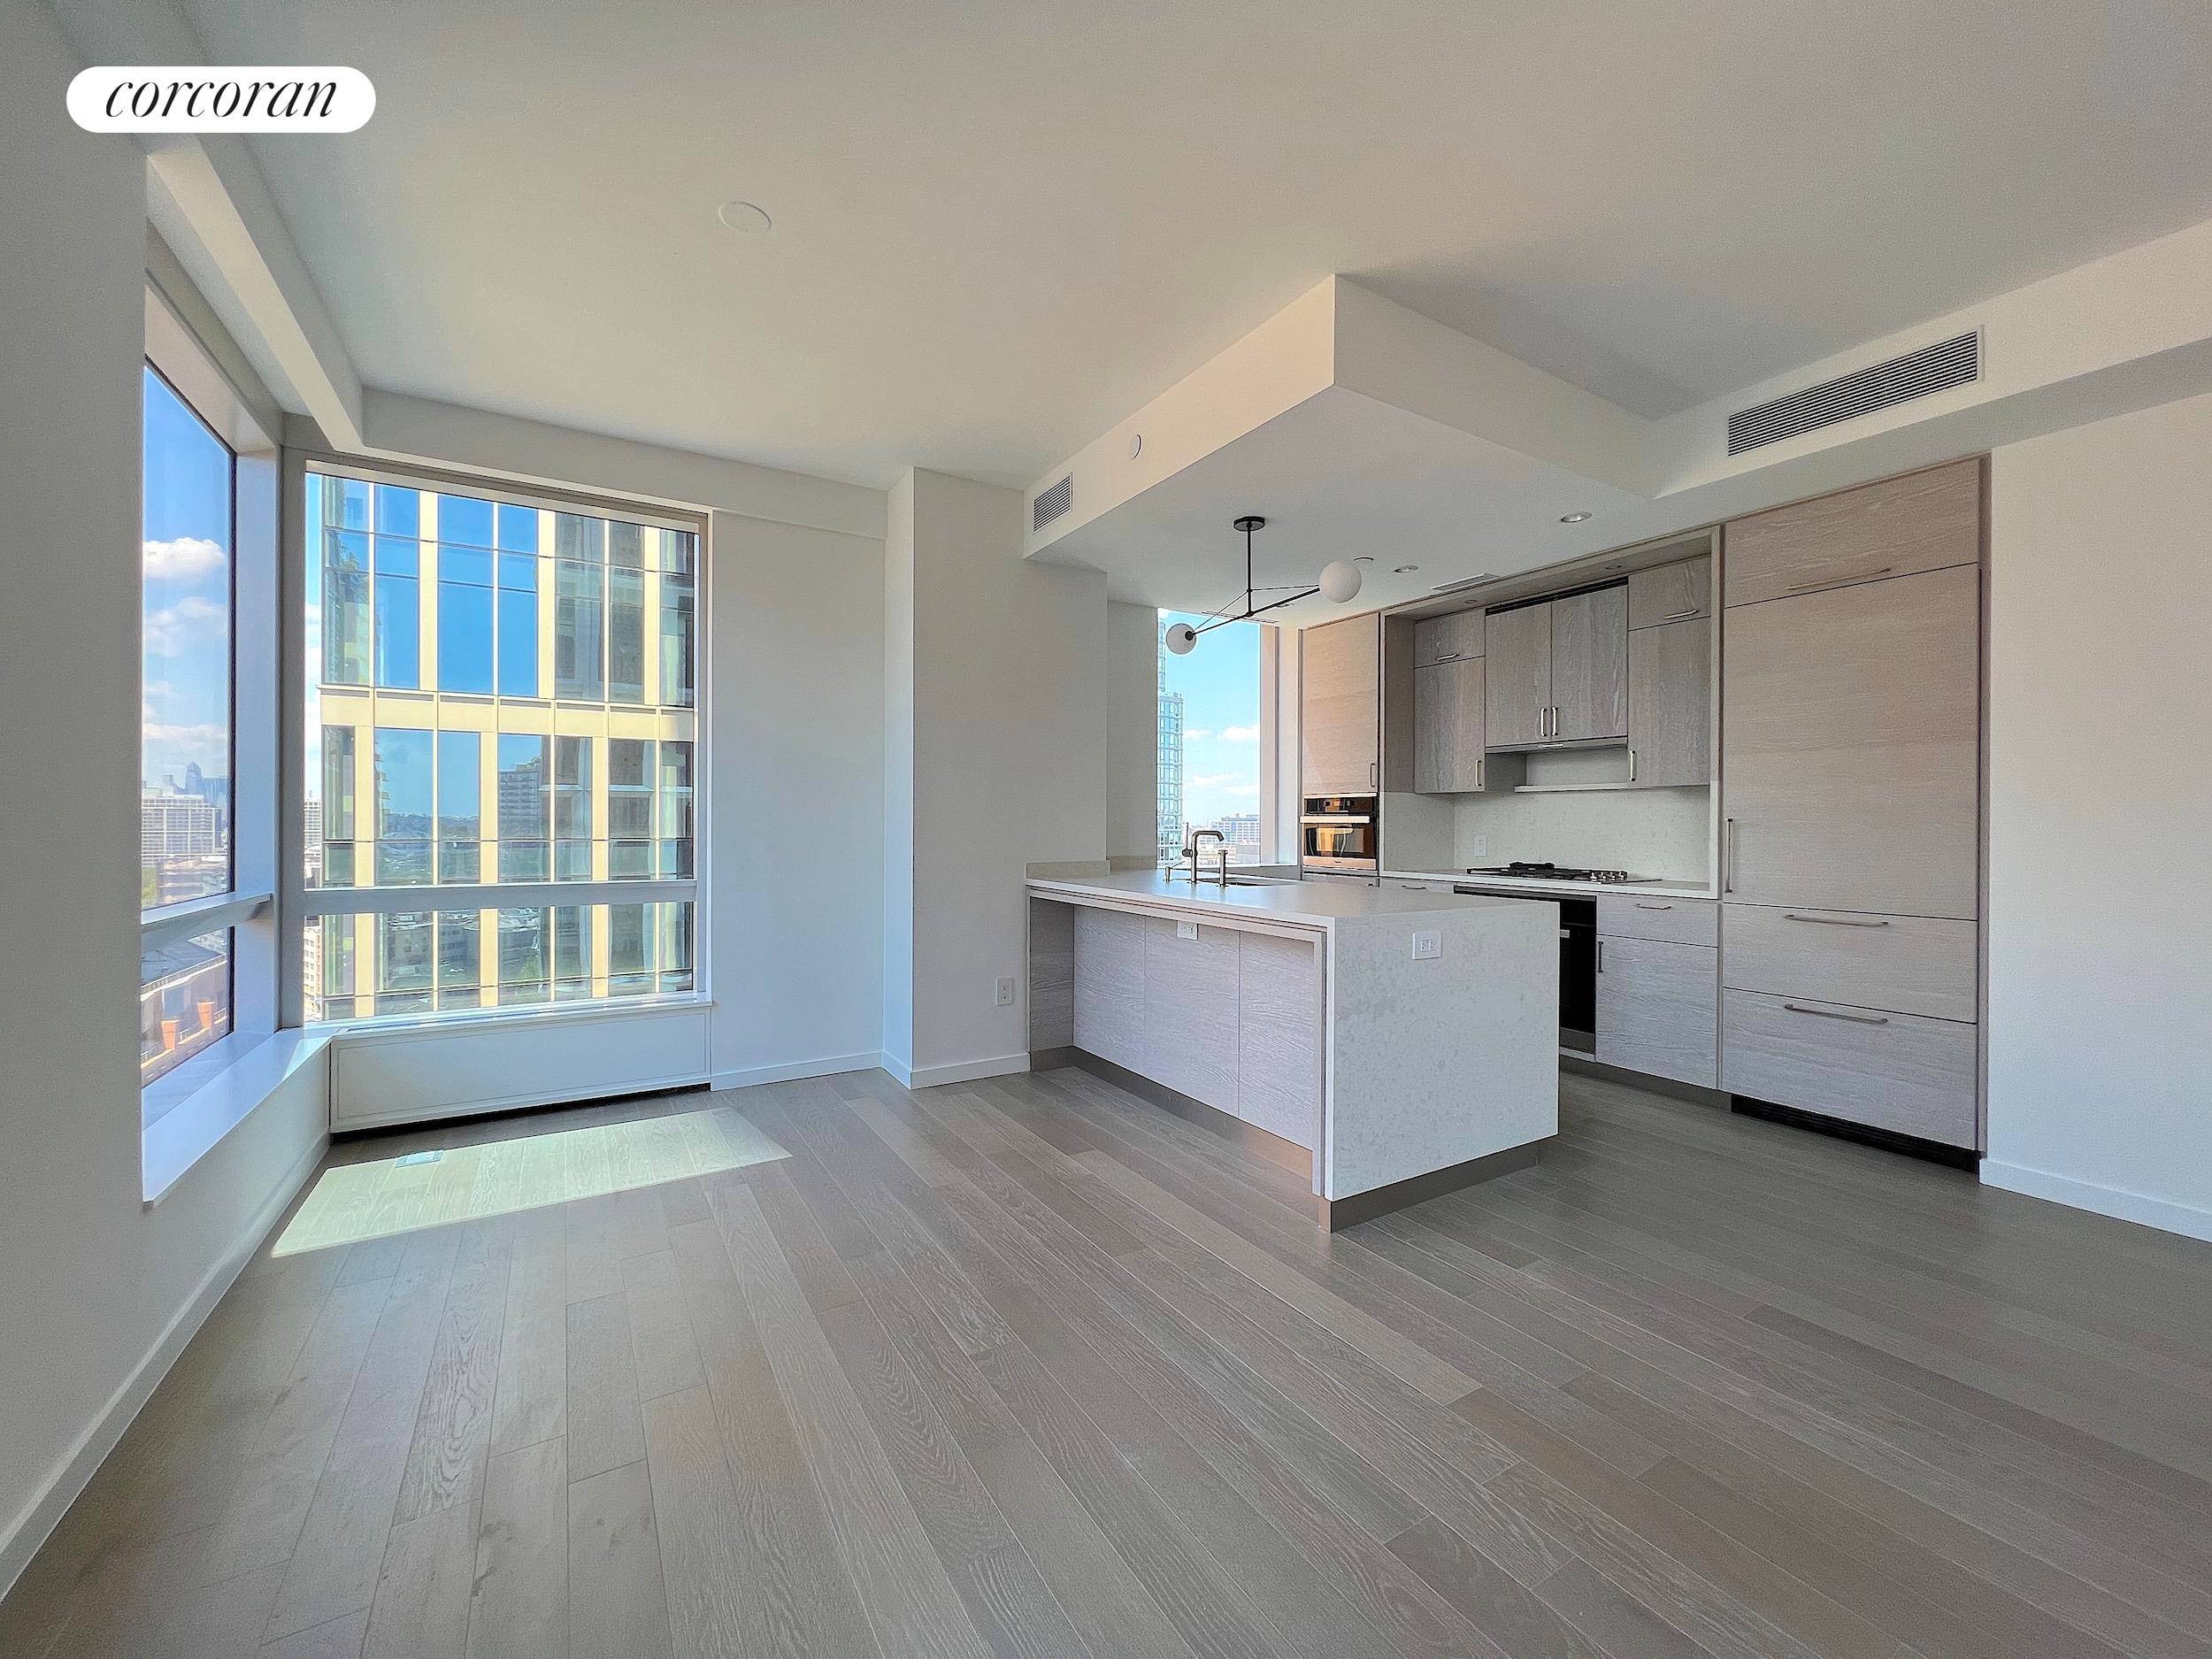 Brand New Beautiful 2BR 2 Bath Corner home with 2 Exposures in luxury building located in the Heart of Downtown Brooklyn.